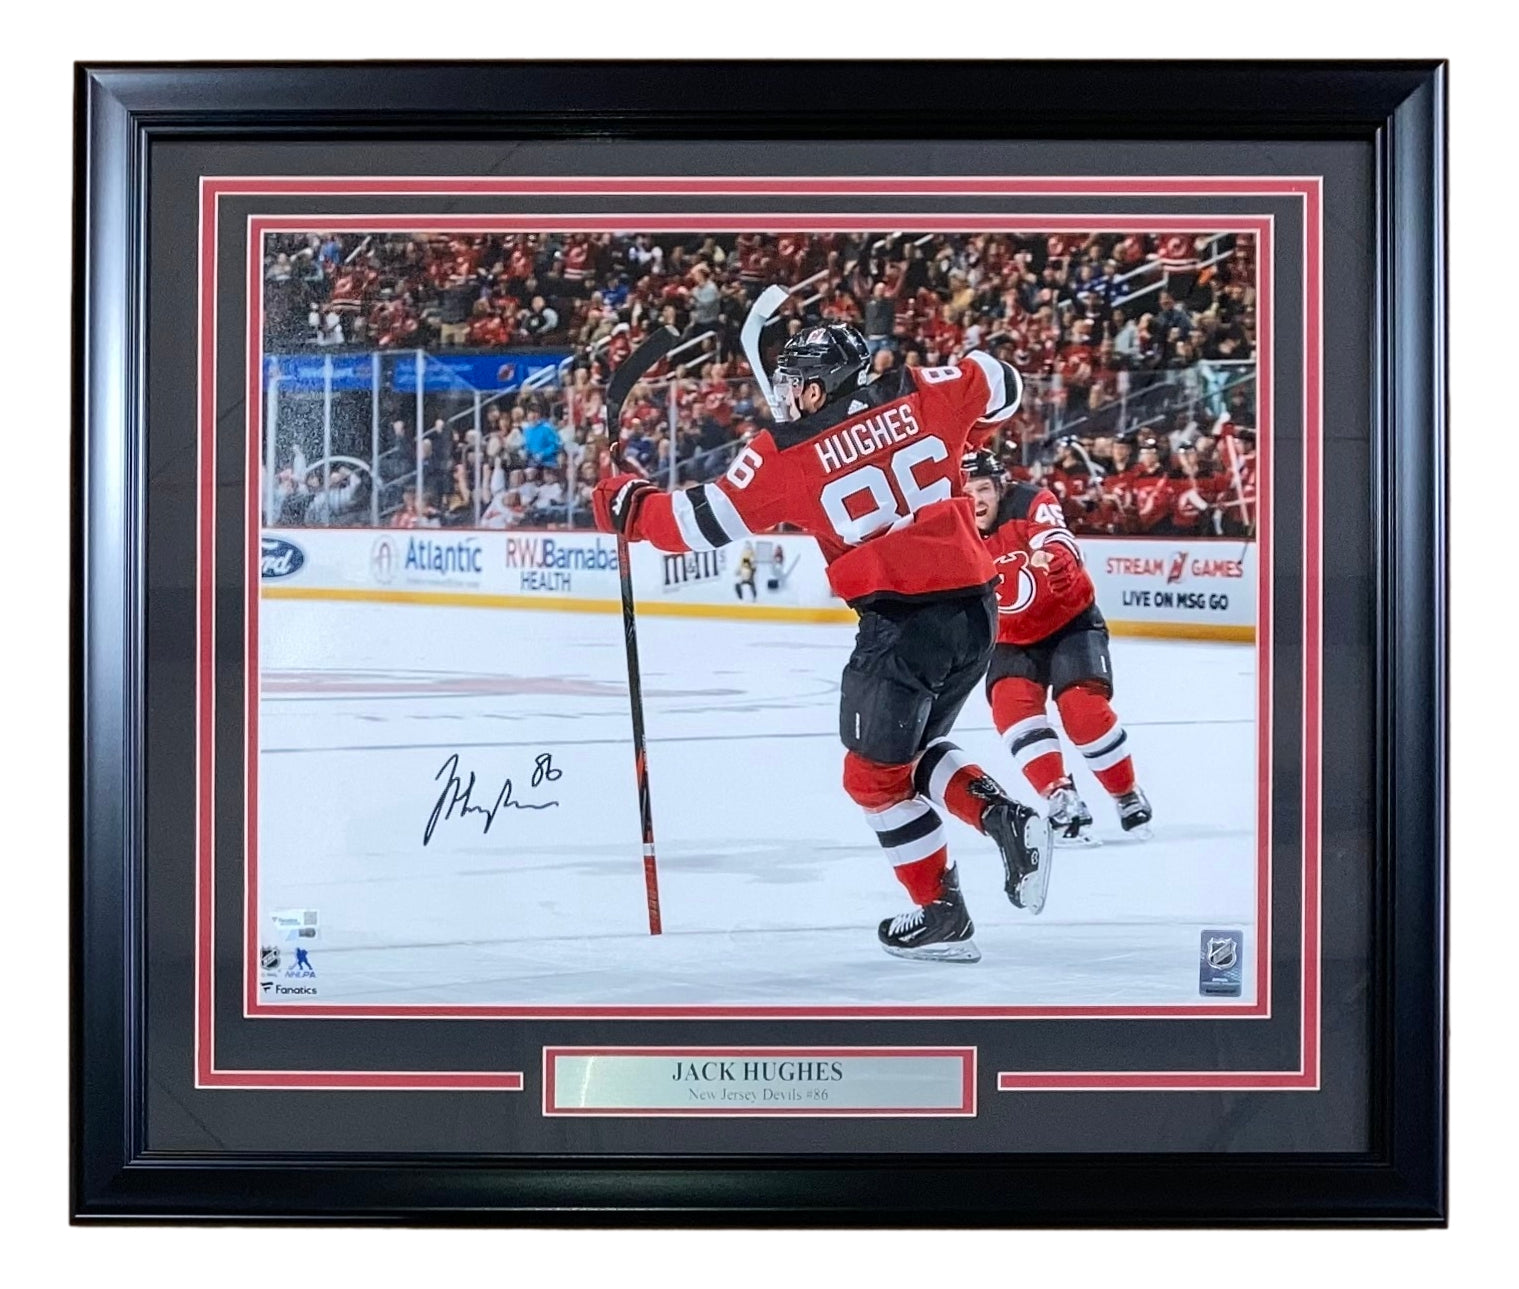 New Jersey Devils Deluxe Framed Autographed 16 x 20 2000 Stanley Cup Champions Banner Raising Photograph with 20 Signatures